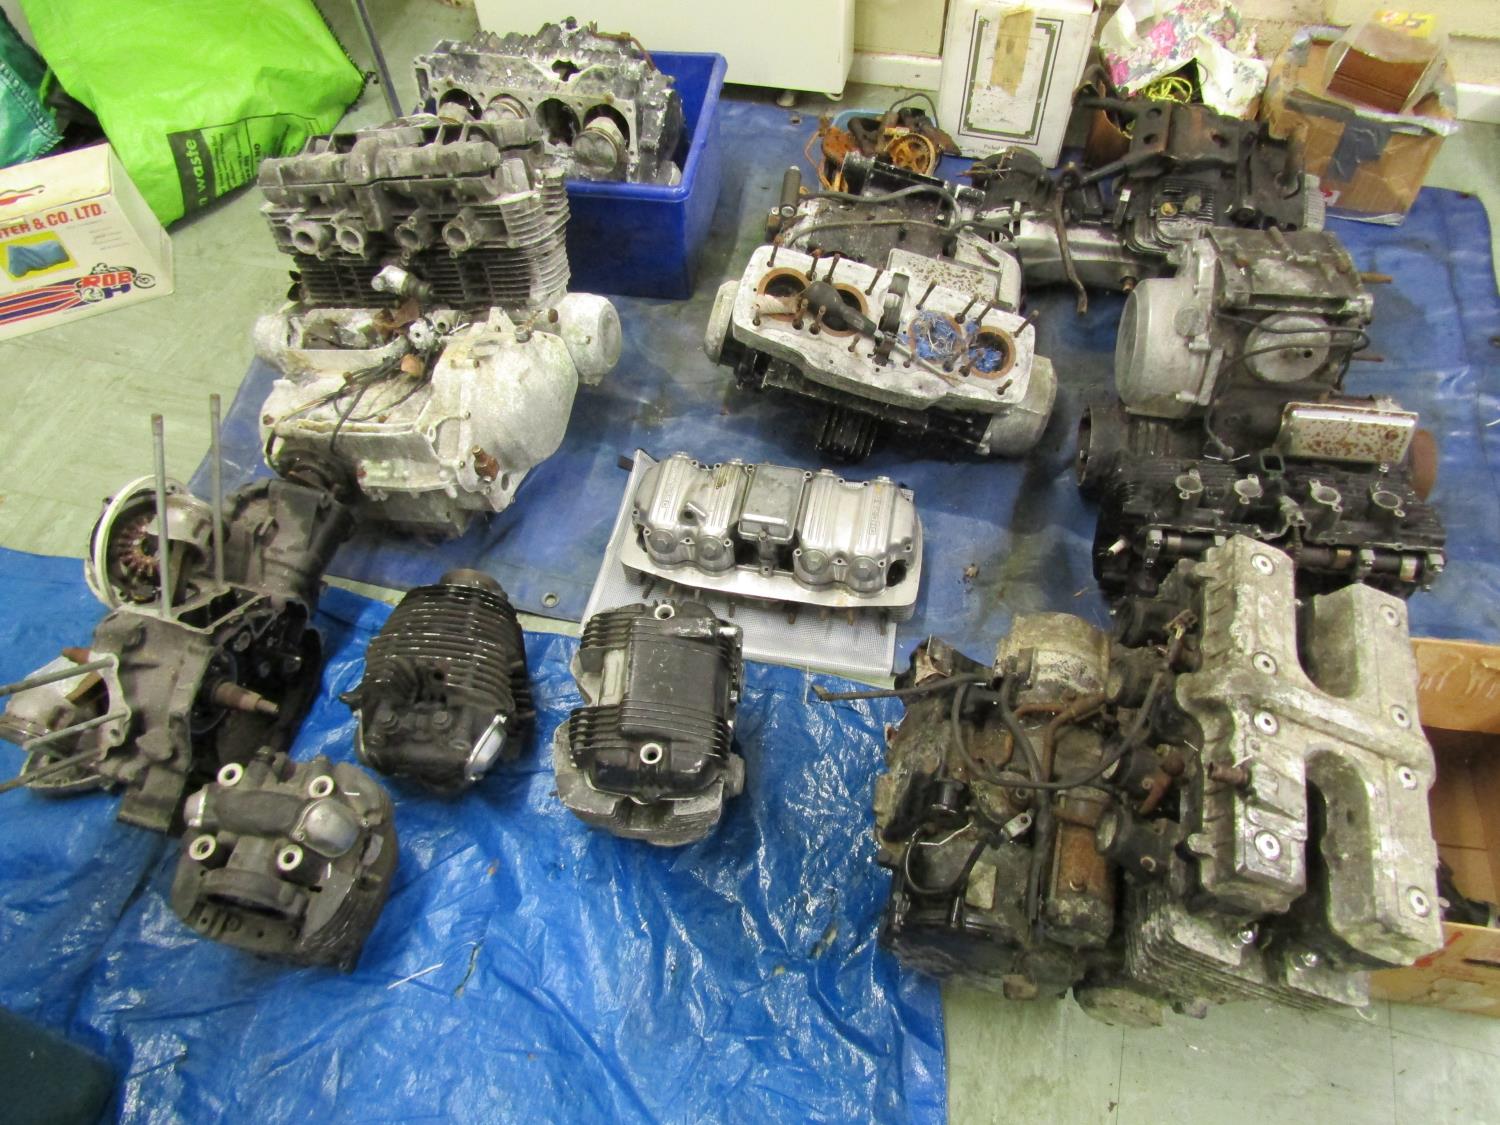 Five motorcycle engine/blocks, together with various cylinder heads etc